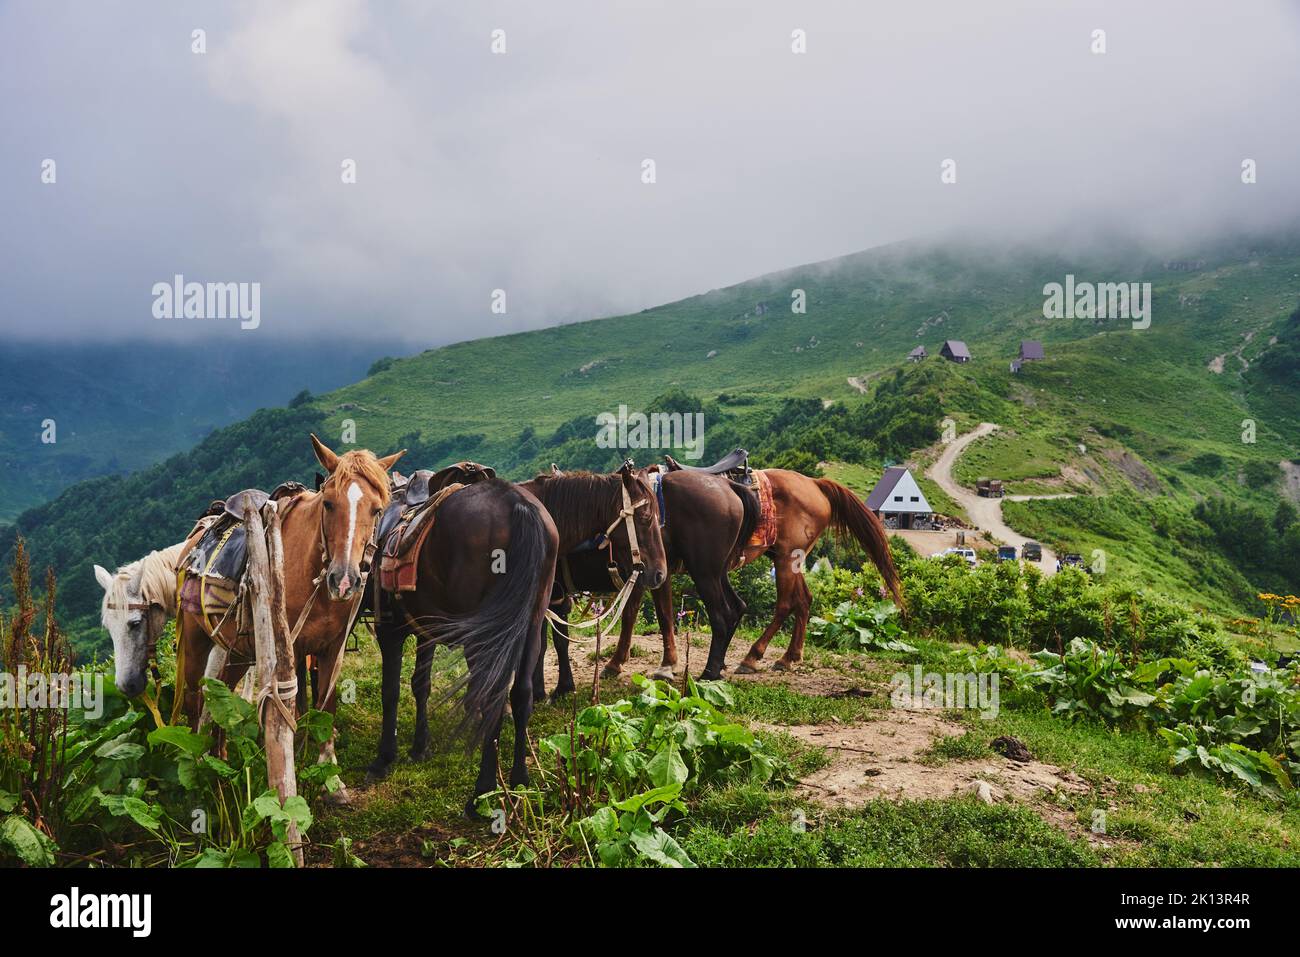 Saddled horses against the background of green hills and fog. horses waiting for tourists. Ecotourism in the mountains. Stock Photo